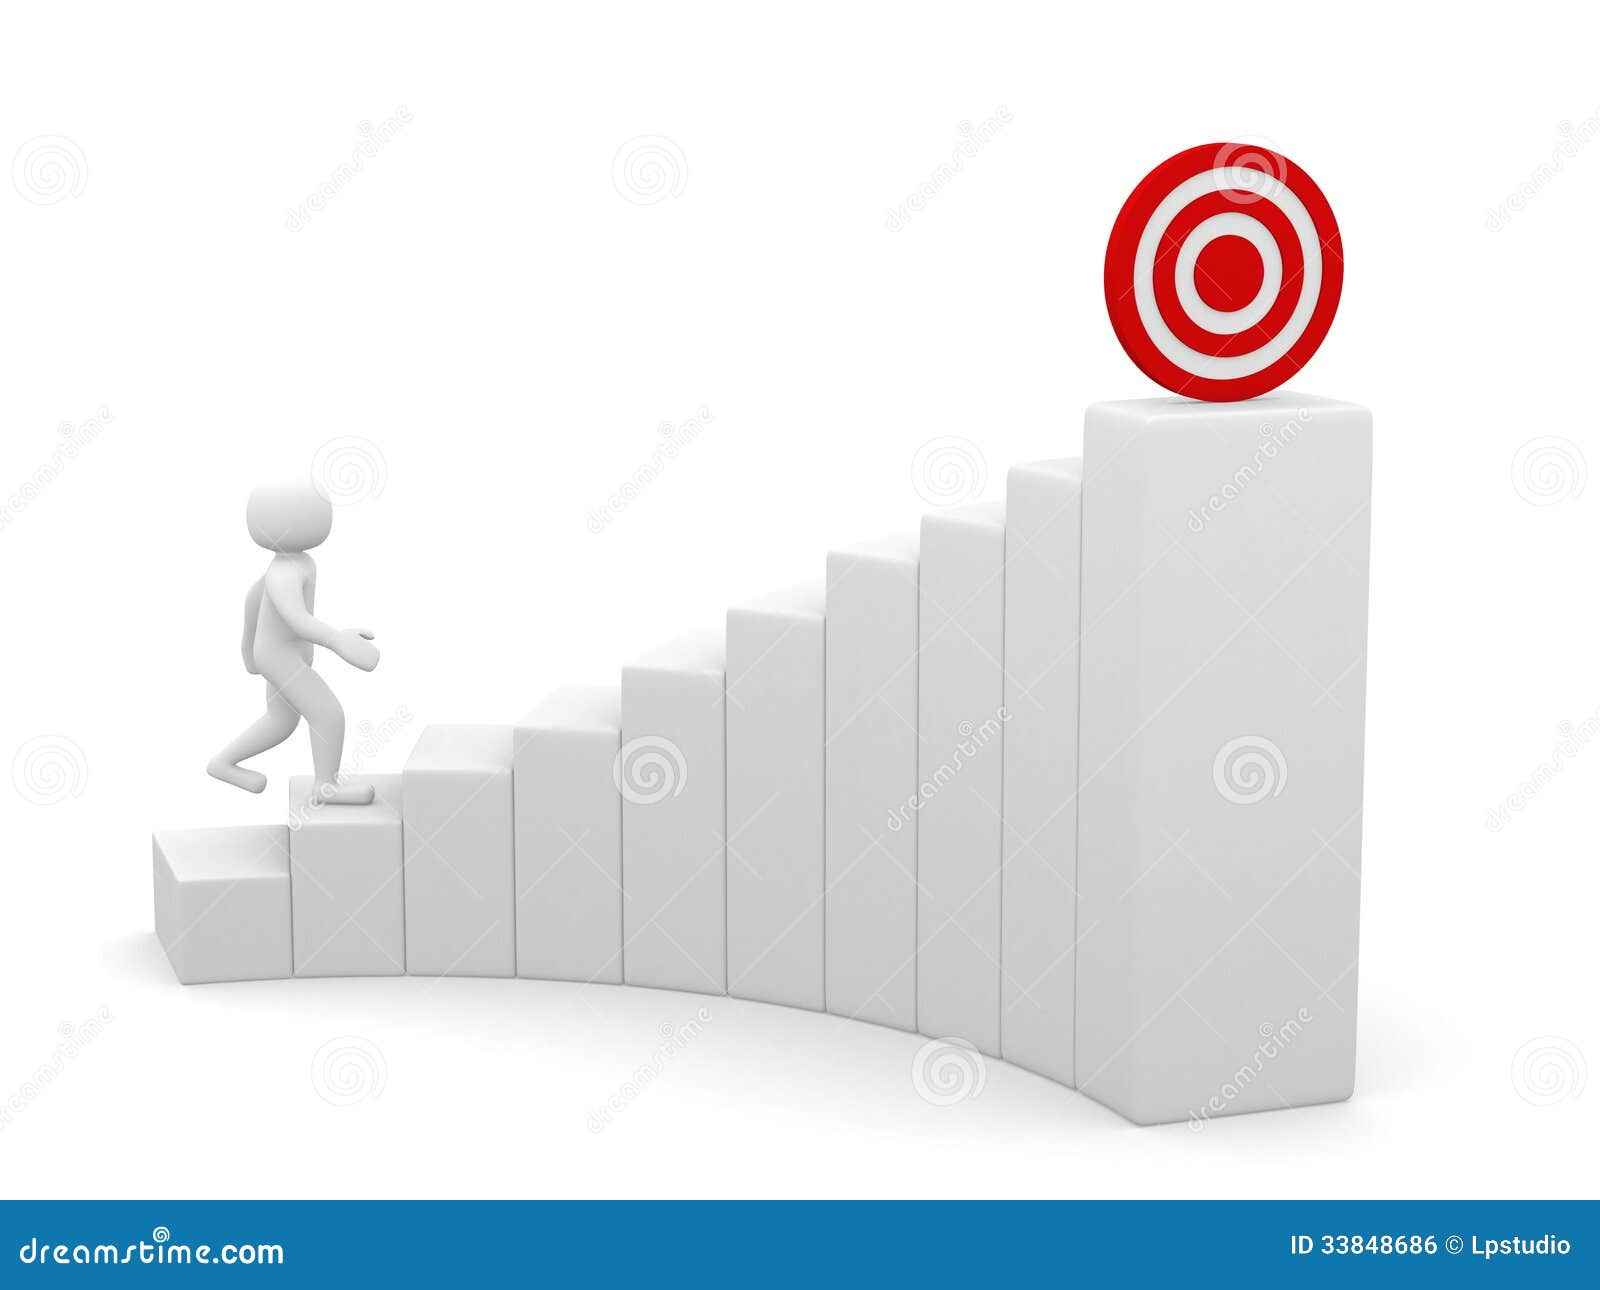 3d Man Running To the Target on Top of the Stairs Stock Illustration - Illustration aiming, 33848686